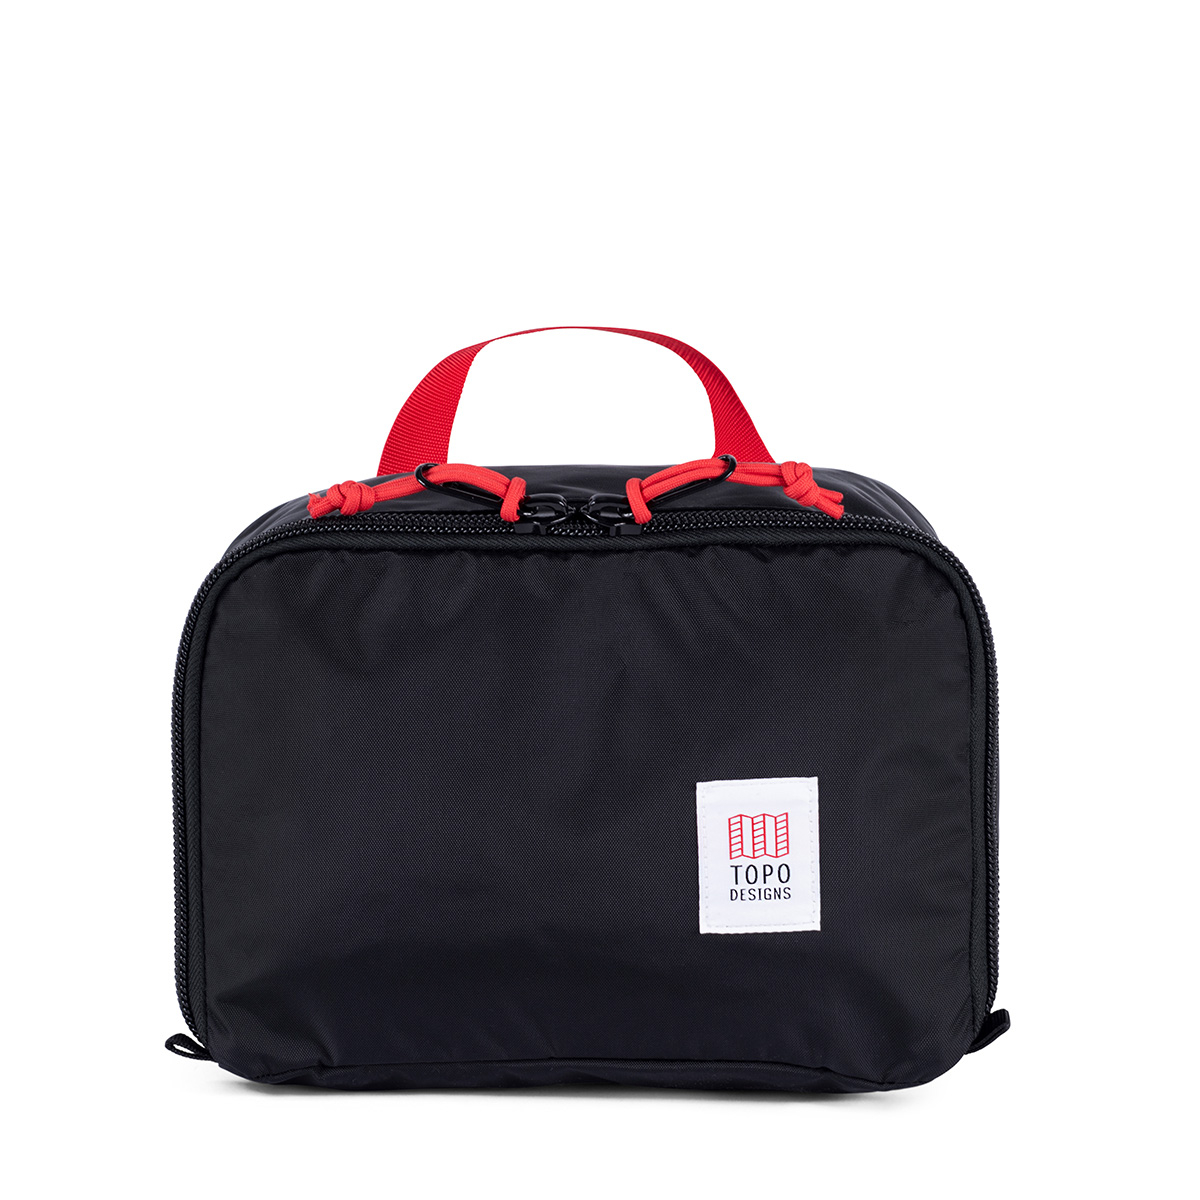 Topo Designs Pack Bag 10L Cube Black, a simple, durable and highly functional way to organize your luggage